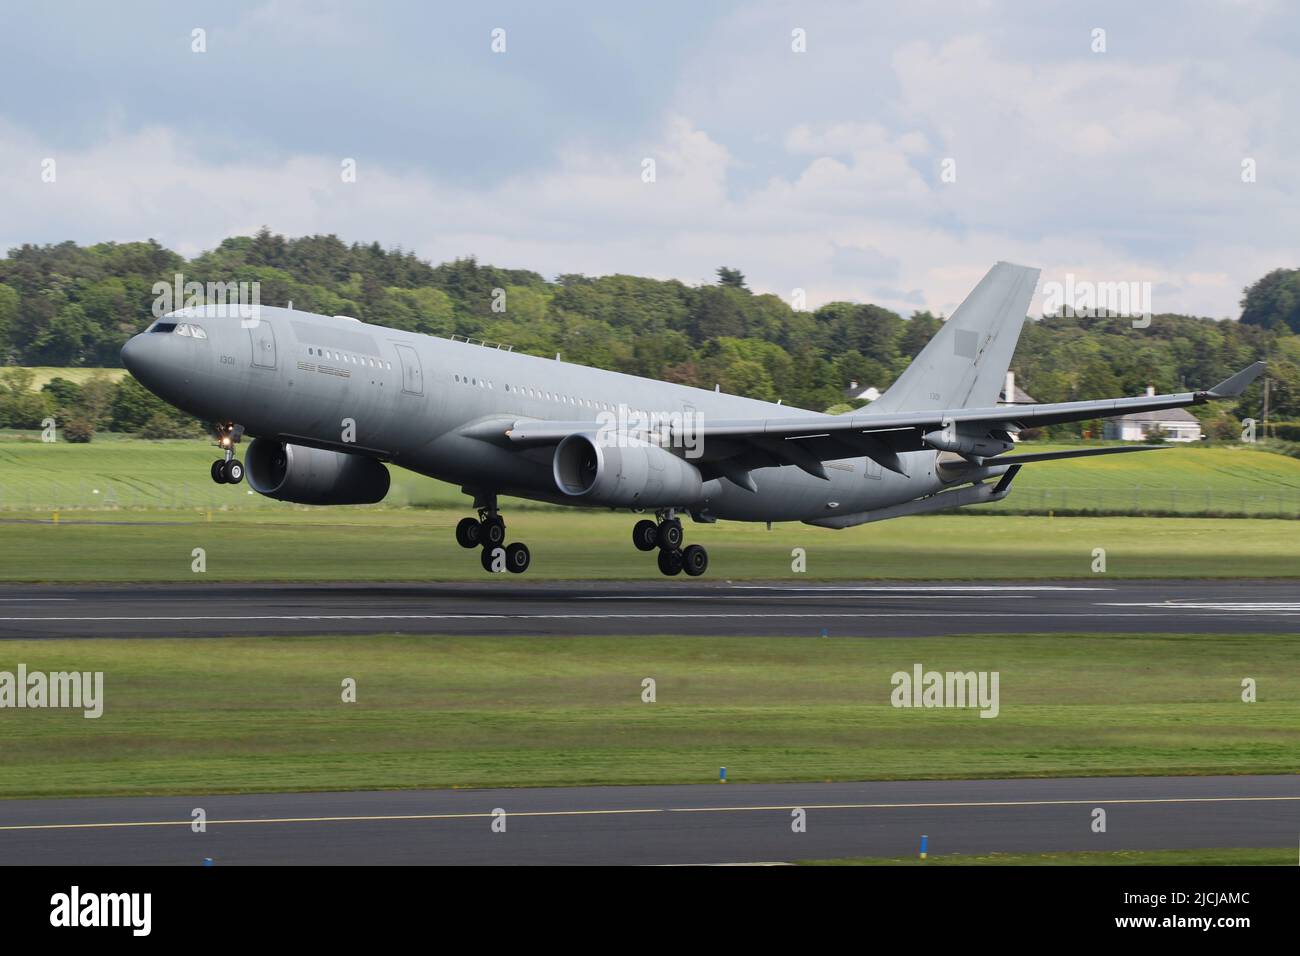 1301, an Airbus A330 MRTT (multirole tanker transport) operated by the United Arab Emirates Air Force, arriving at Prestwick International Airport in Ayrshire, Scotland. With the exception of the serial number, the aircraft had been scrubbed of all military titles and insignia. Stock Photo